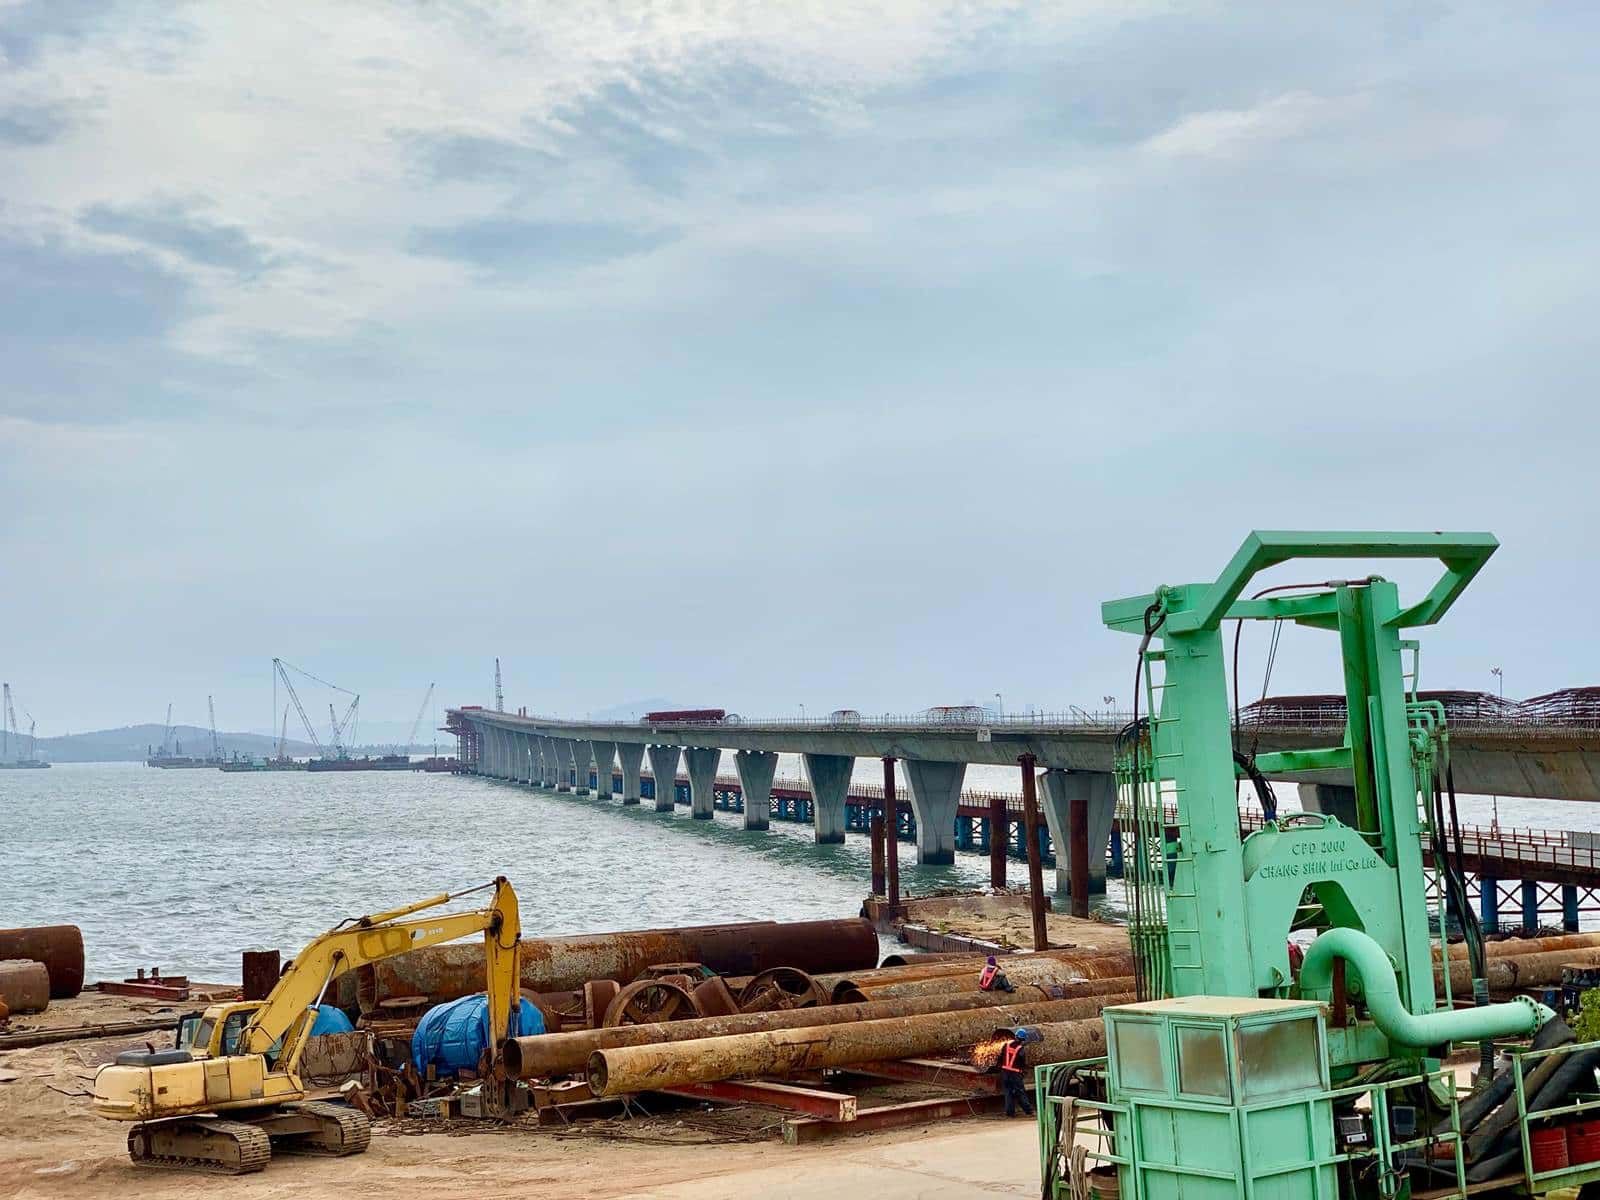 The Kinmen Bridge will connect Greater Kinmen Island and Lieyu Island. Yet the Kinmenese prefer a bridge that can connect Greater Kinmen with Xiamen. To the Kinmenese, are the “New Four Links” the only solution? Image by Amber Lin. Taiwan, 2019.